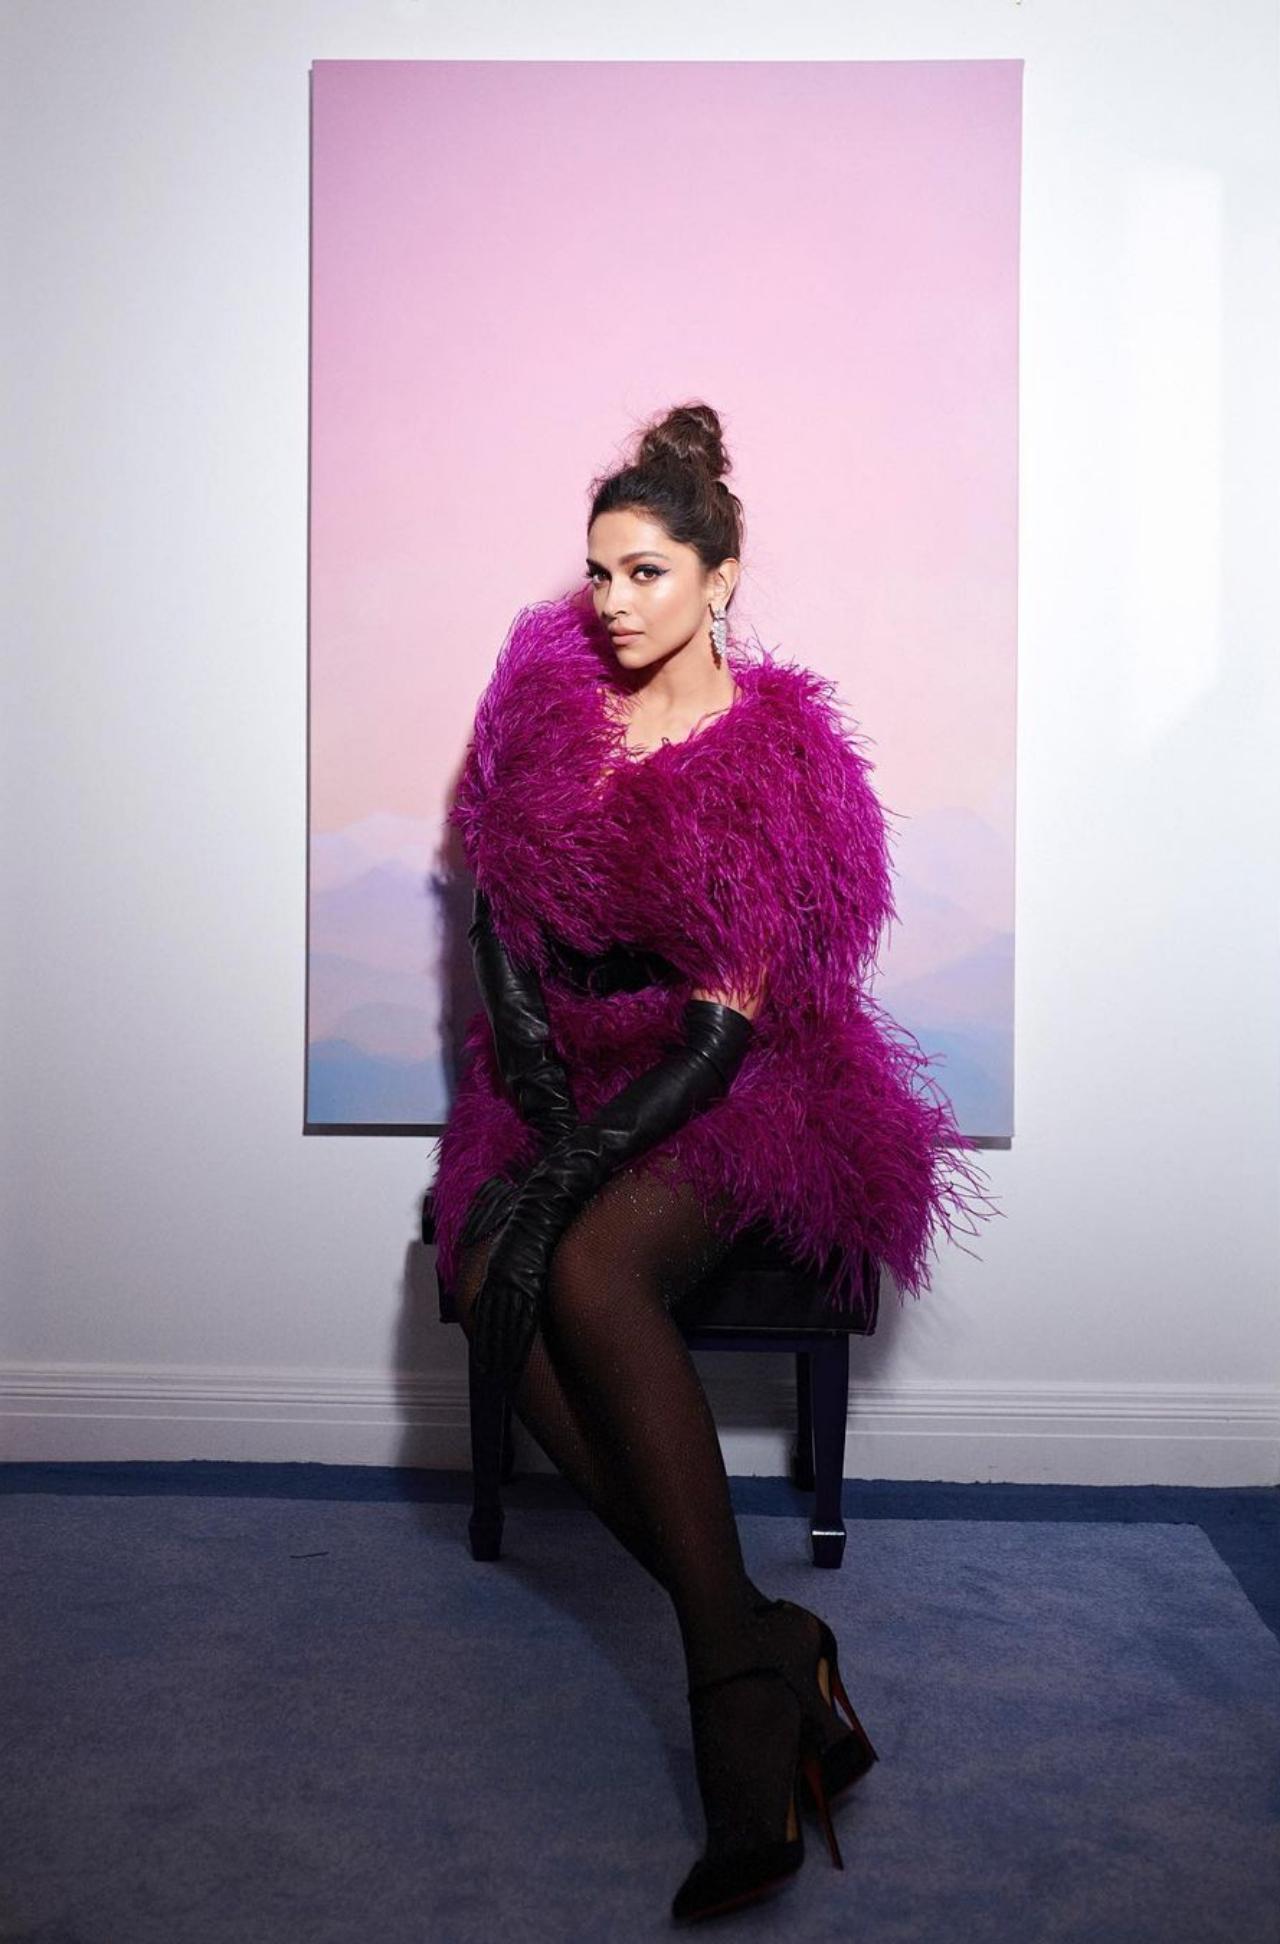 For the after-party look, Deepika opted for a magenta feather dress, which had the right pop of vibrancy. The dress was paired with long black leather gloves, black stockings and black pumps. The dress also consists of a black belt in the centre to cinch in the waist and give the dress a good silhouette. 